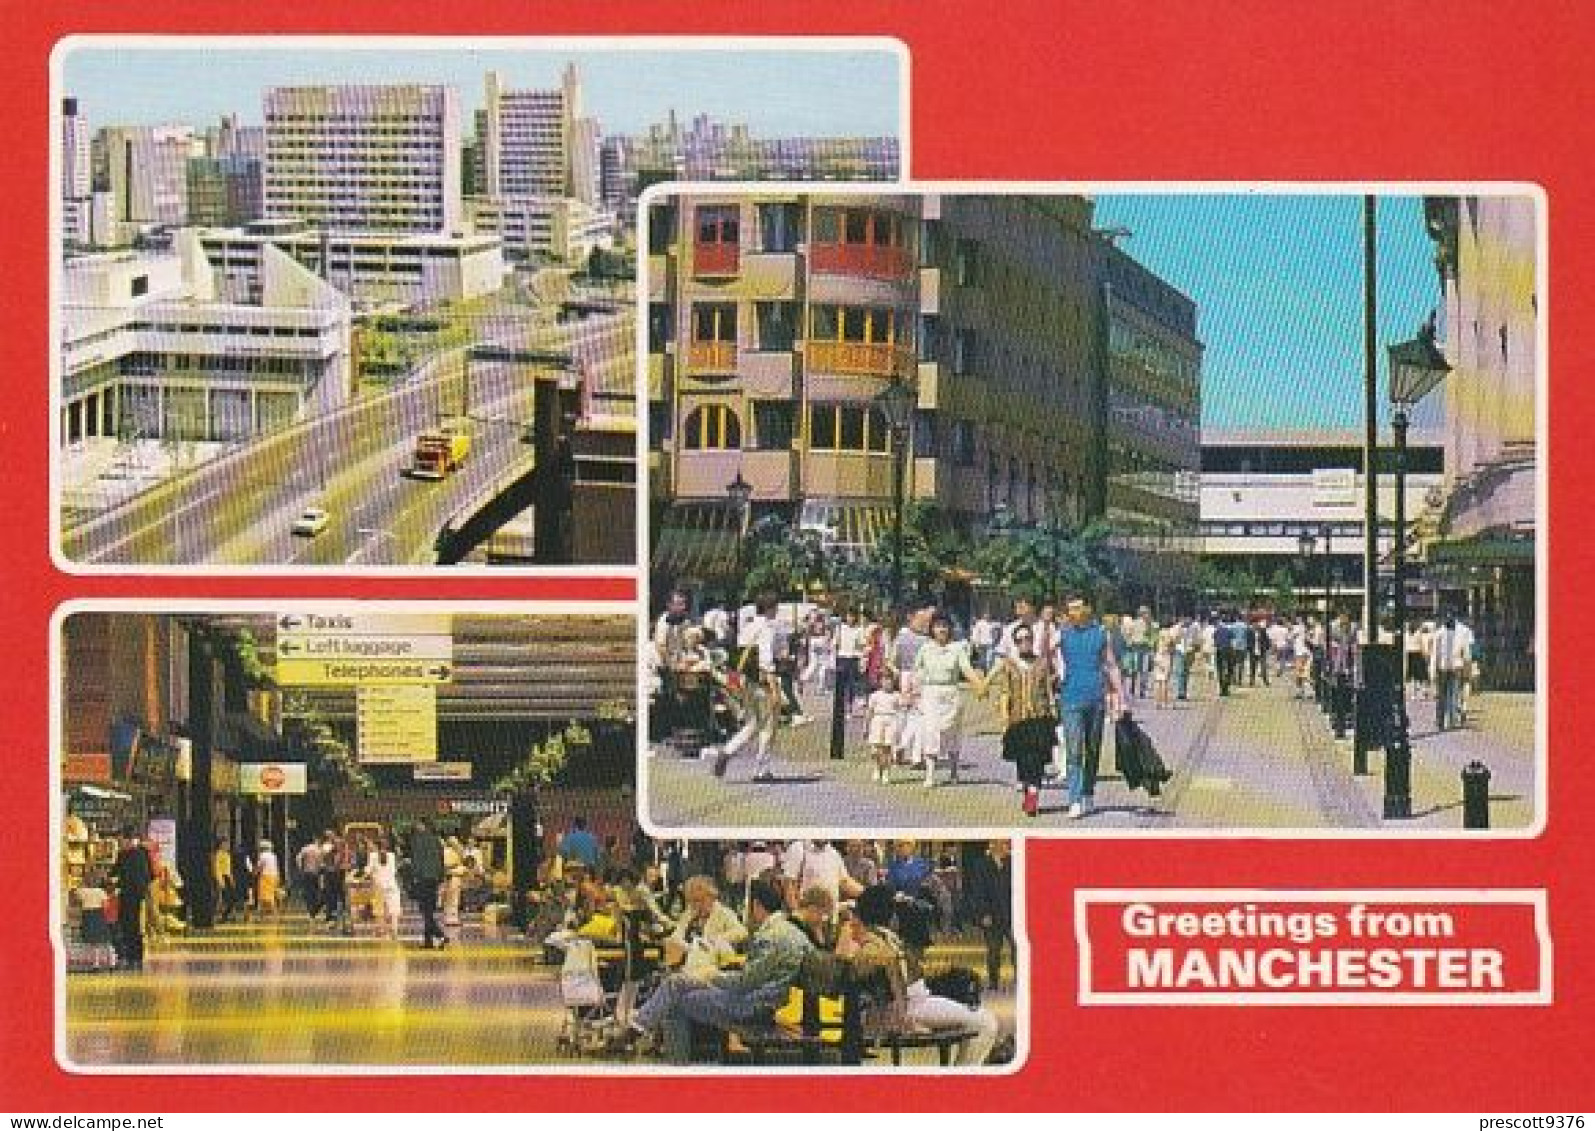 Greetings From From Manchester  - Lancashire - Unused Postcard - Lan4 - Manchester